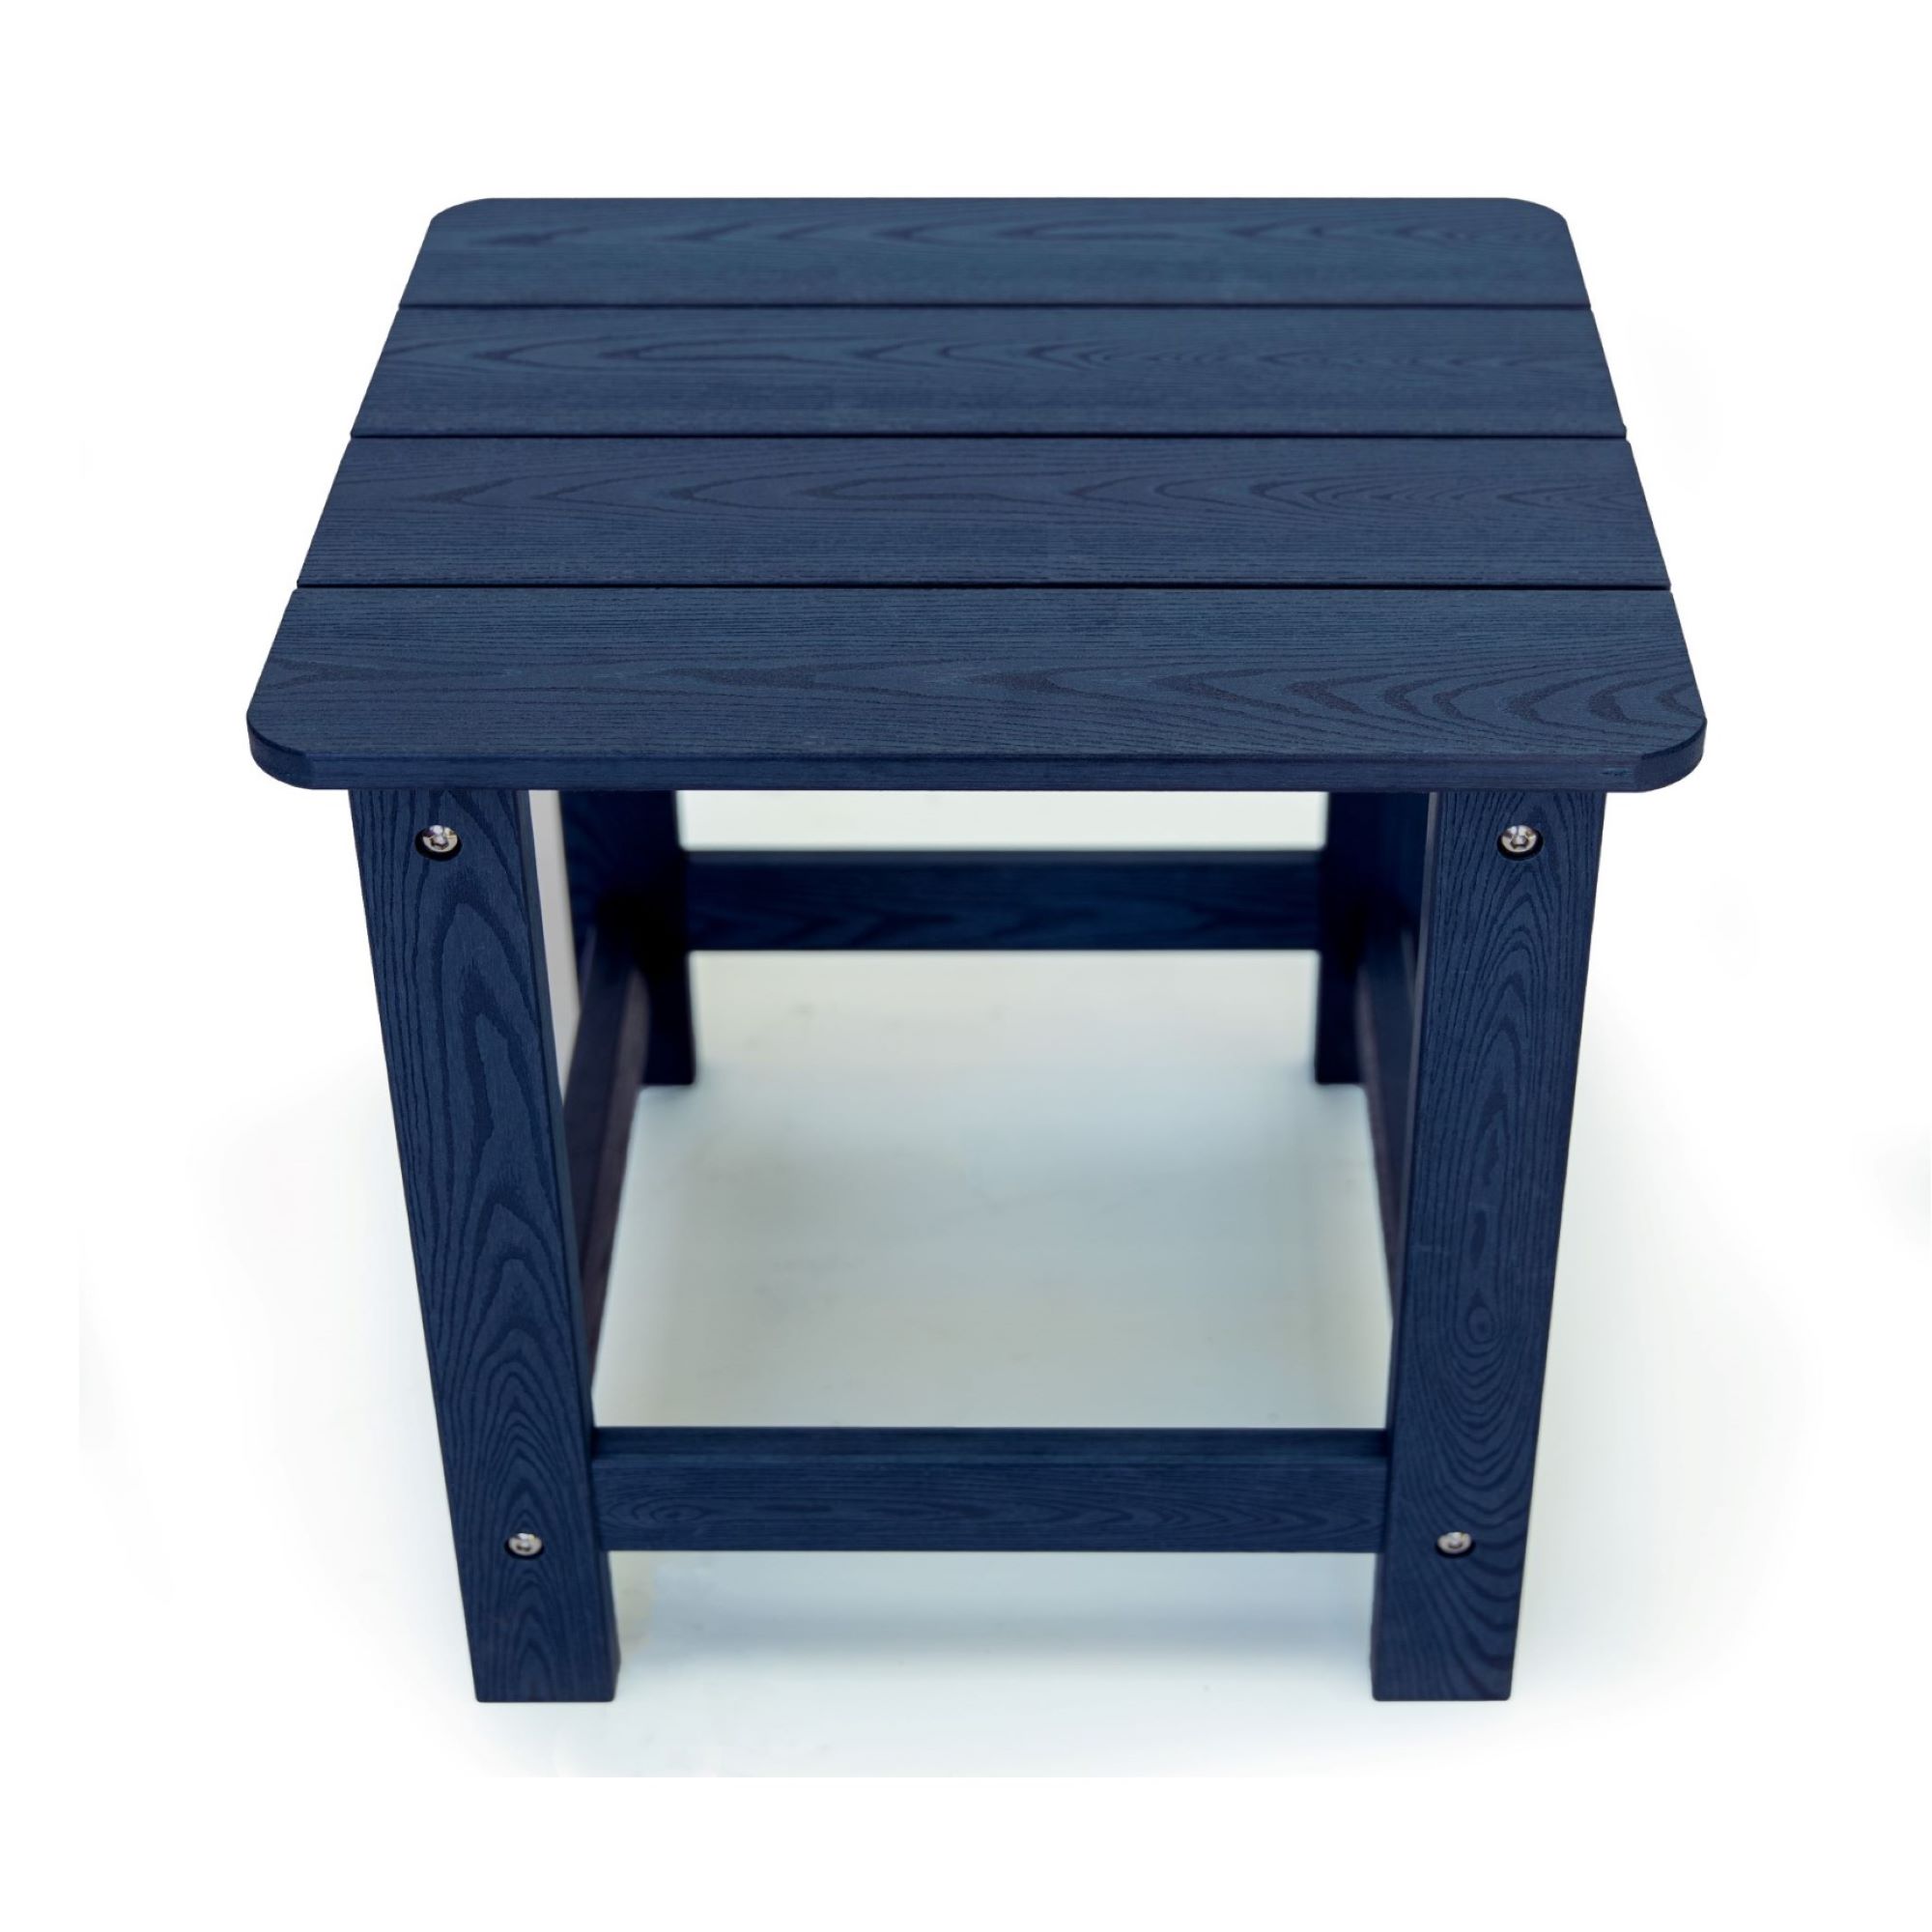 All Weather Indoor-Outdoor Side Table, Navy - image 5 of 7